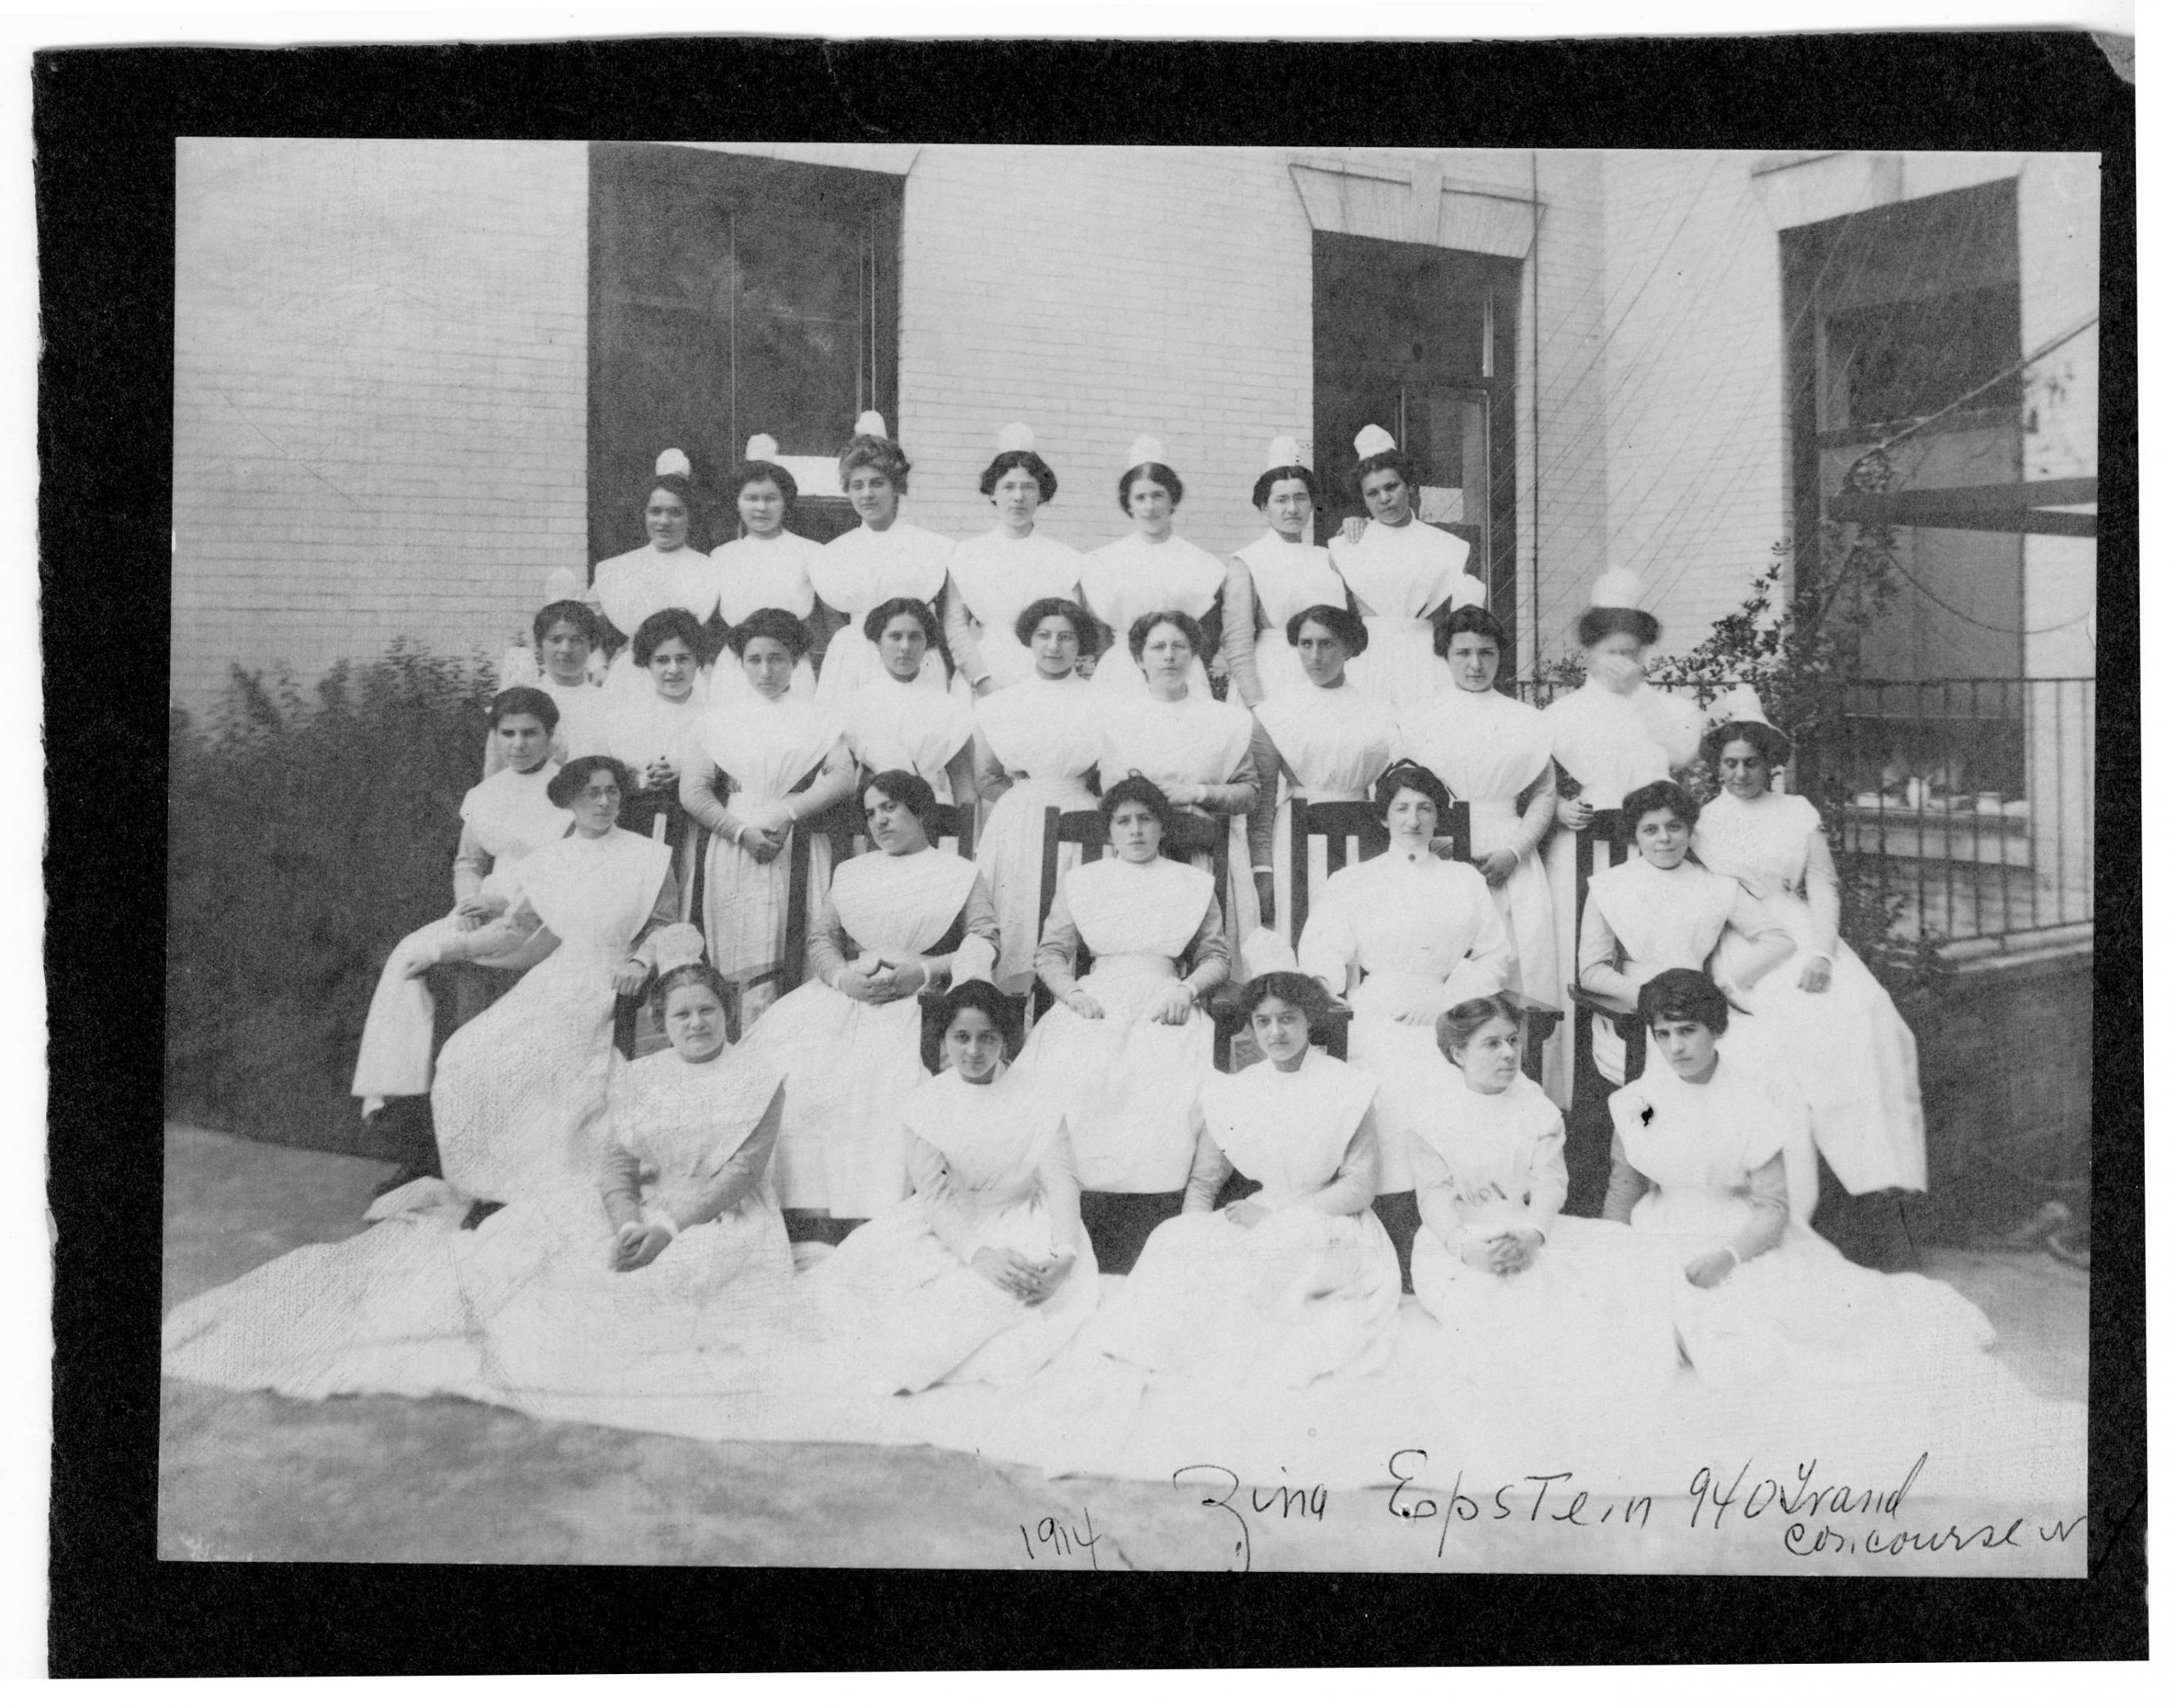 A black and white photograph from 1914. Four rows of young women in nursing uniforms, composed of floor length white dresses and a starched cap, pose for a class photograph in front of the Beth Israel Hospital Jefferson and Cherry Streets location. Handwriting at the bottom reads "1914 - Zina Epstein 940 Grand Concourse"